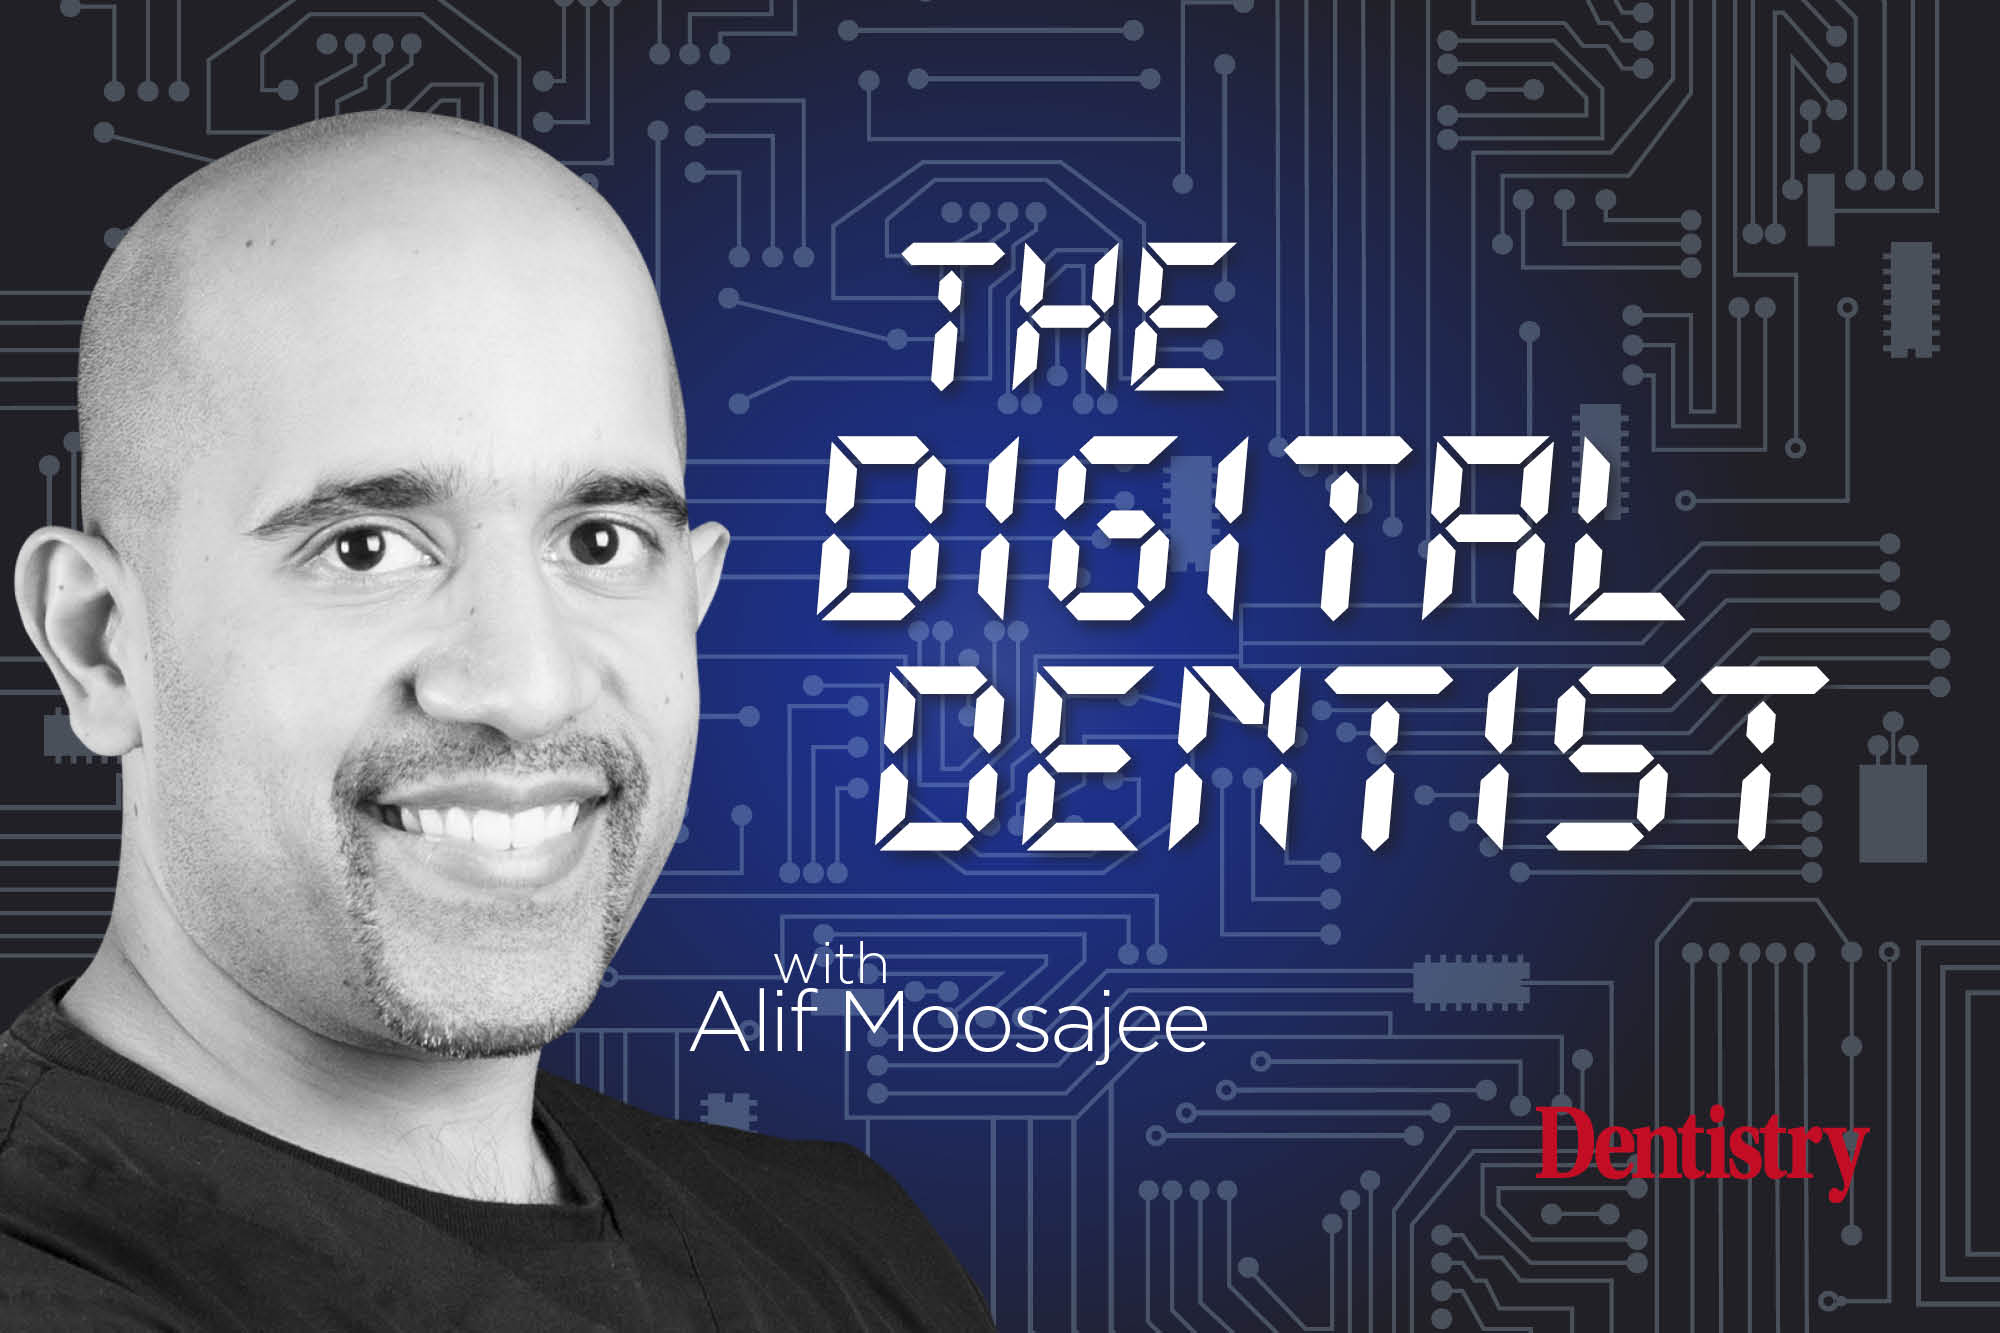 Dr Alif Moosajee (Aka The Smiling Dentist) tackles the topic of occlusion and why he thinks an understanding is crucial for digital dentistry